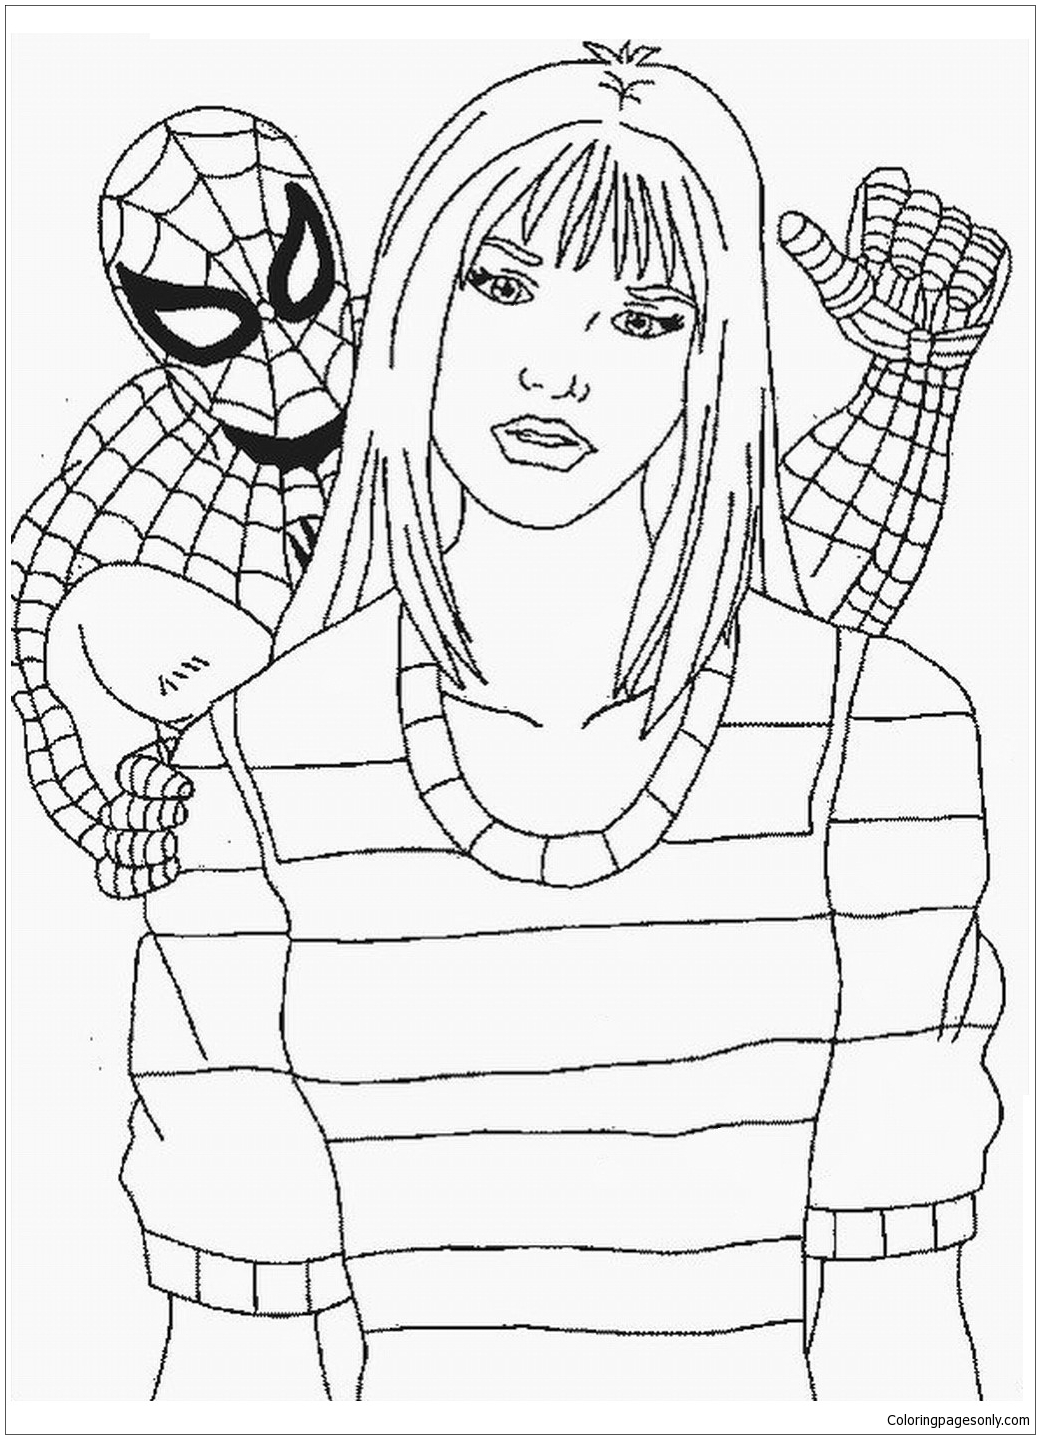 Spiderman 22 Coloring Pages